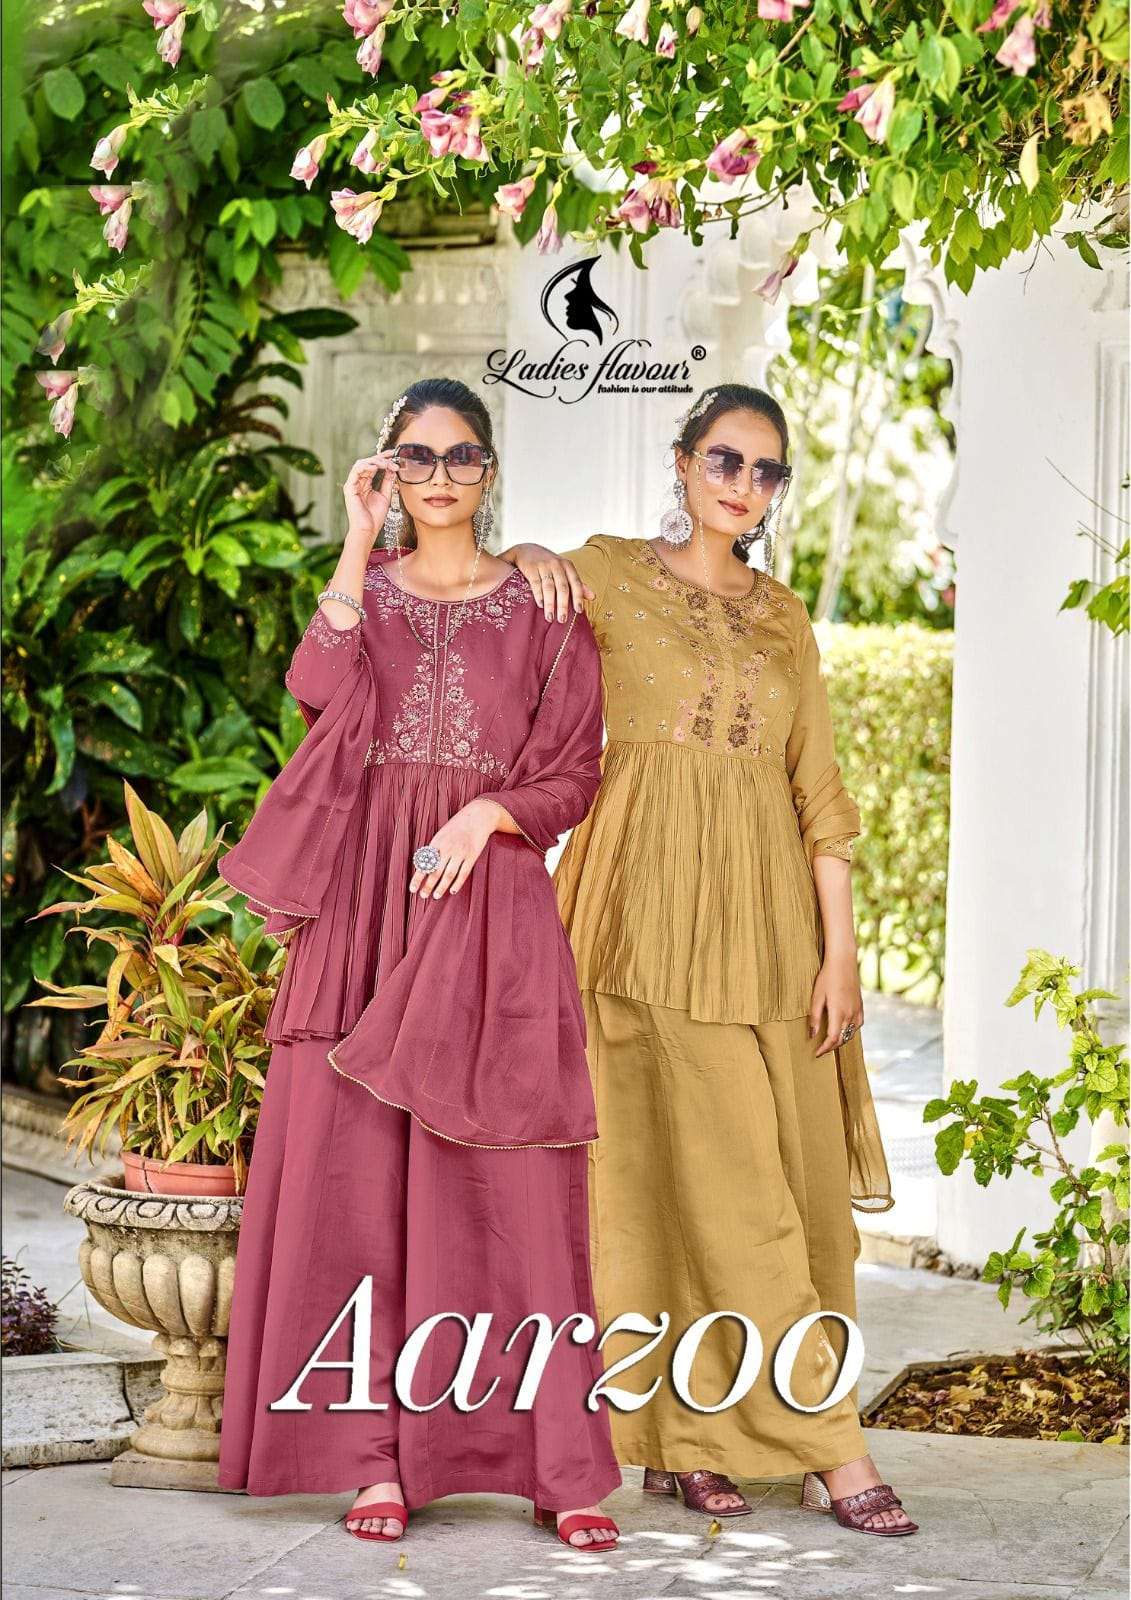 AARZOO CHANDERI SILK EMBROIDERY HAND WORK KURTI WITH PANT AND CHINON CHIFFON DUPATTA BY LADIES FLAVO...